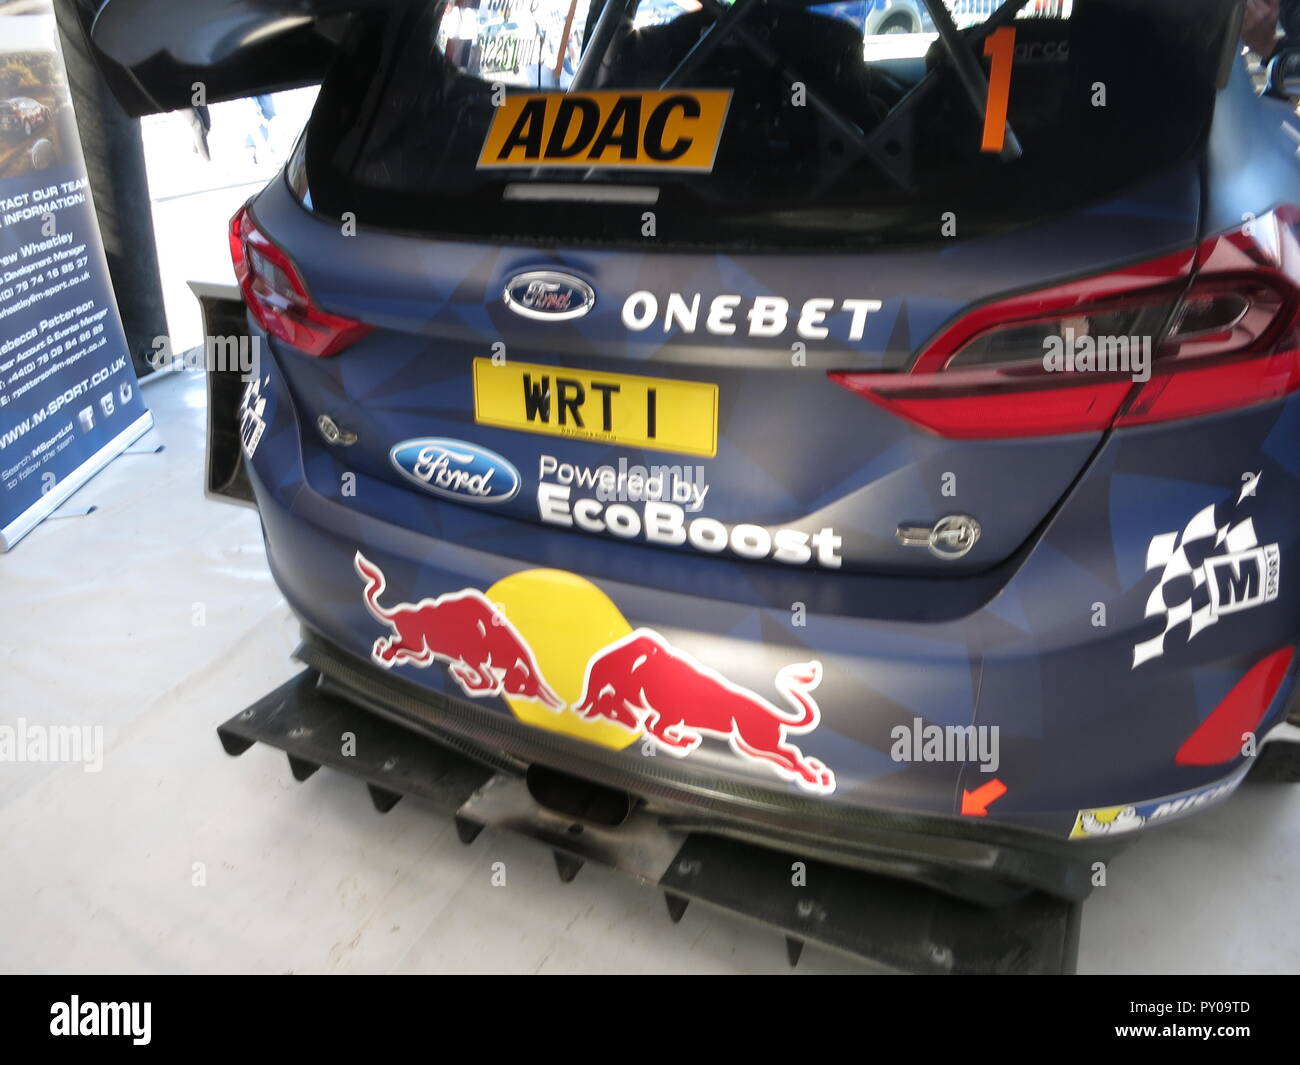 Ford Fiesta Rs Wrc Rally Car As Driven By Sebastien Ogier And Co Driver Julien Ingrassia Shown At Donnington Park Race Circuit At The Rs Owners Club National Day 17 Fresh From A